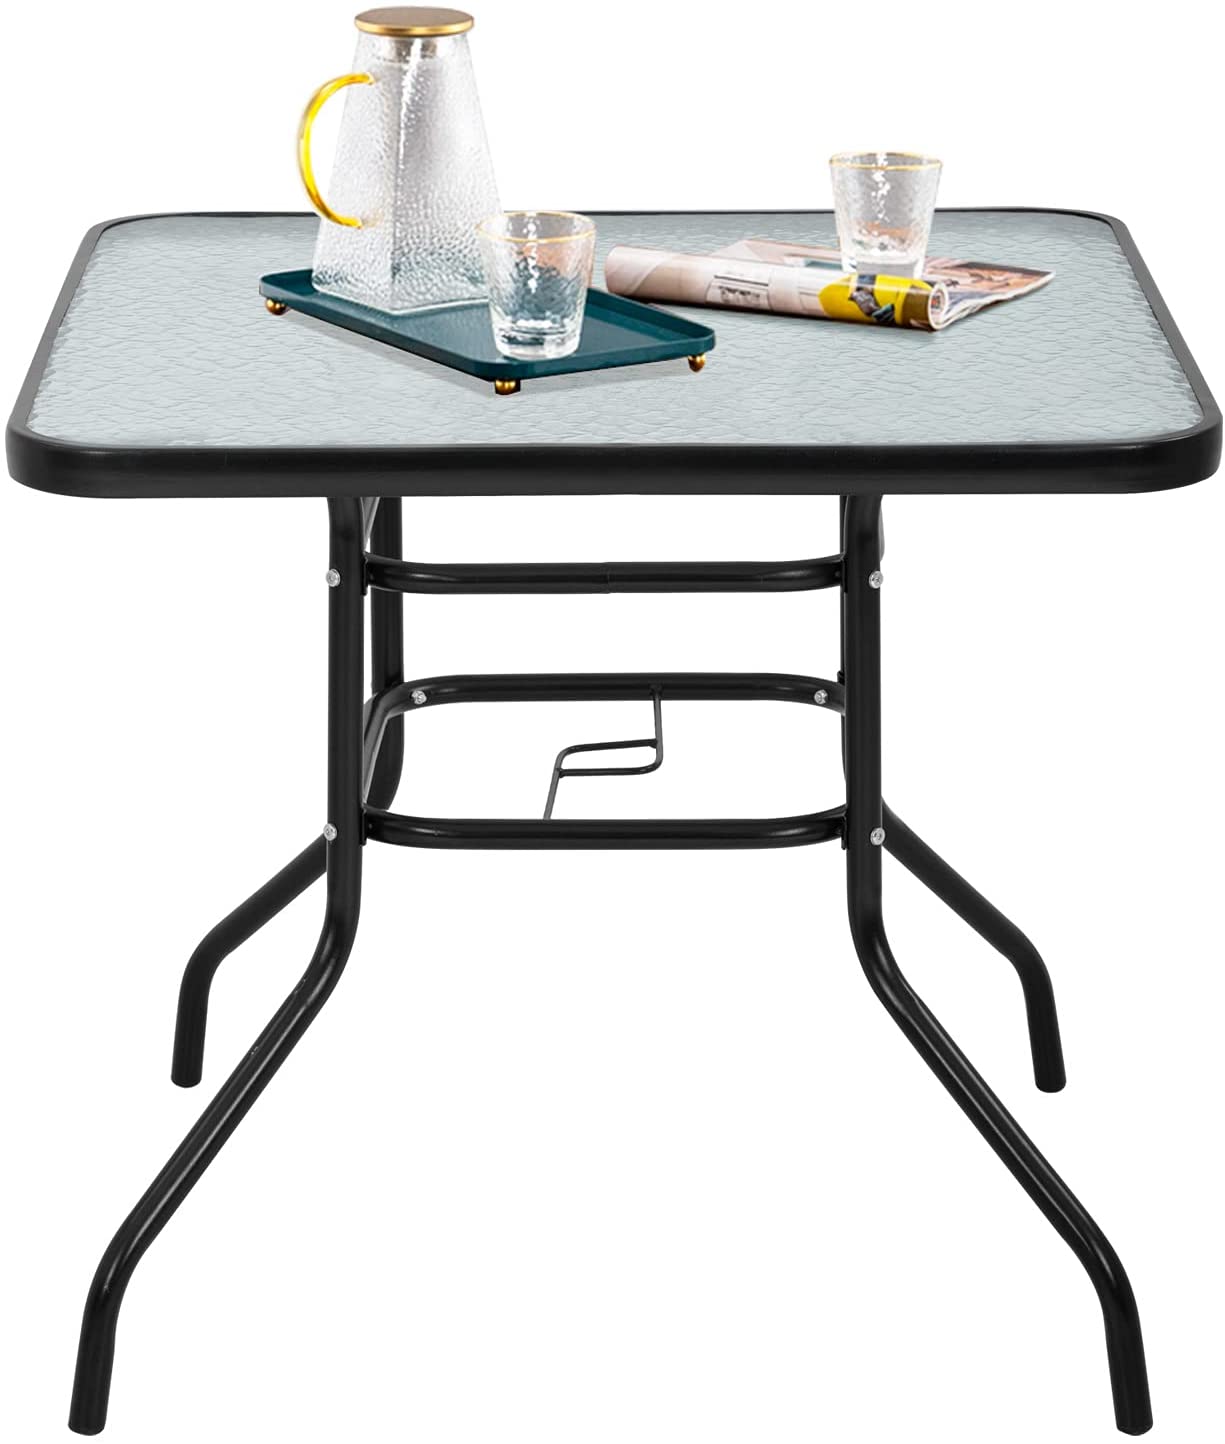 Goorabbit Outdoor Dining Table 31.5" Outdoor Bistro Table Patio Dining Table Square Side Table Coffee Table Furniture with Umbrella Hole, Metal Frame Water Ripple Glass Top(Black) - image 2 of 8